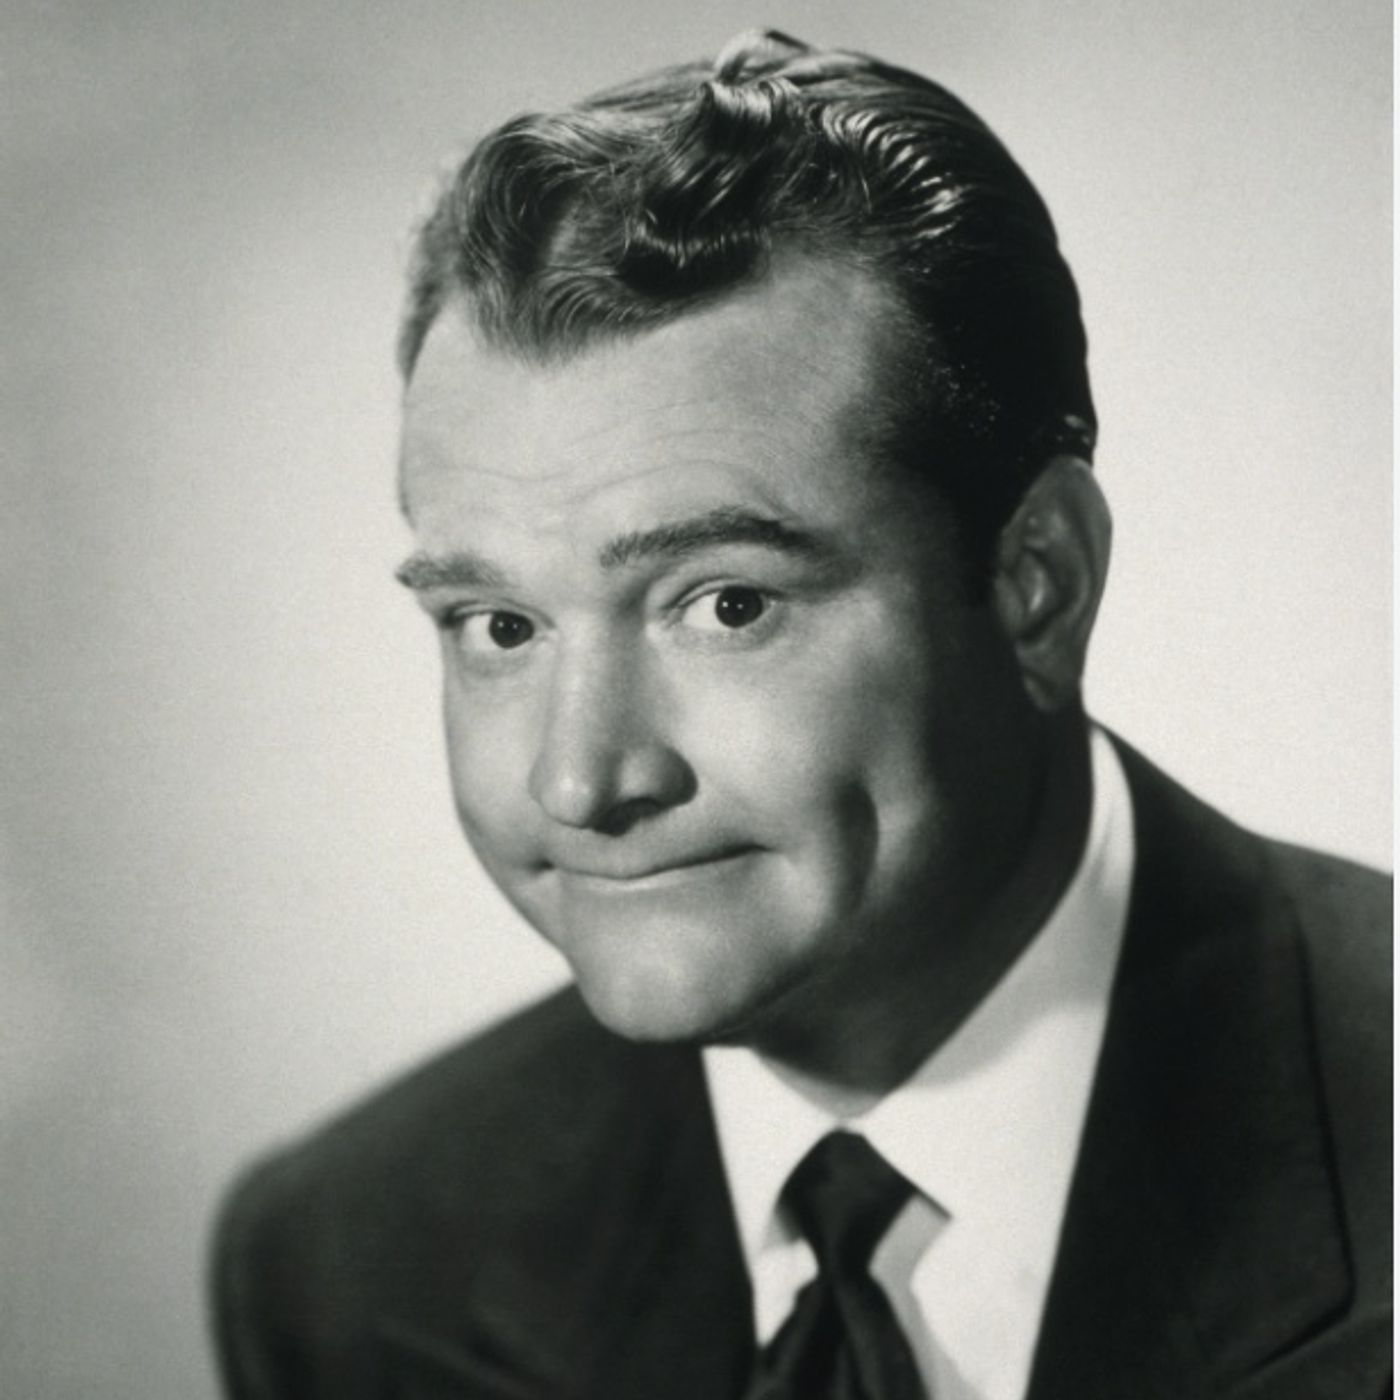 326 Newspspers with Red Skelton